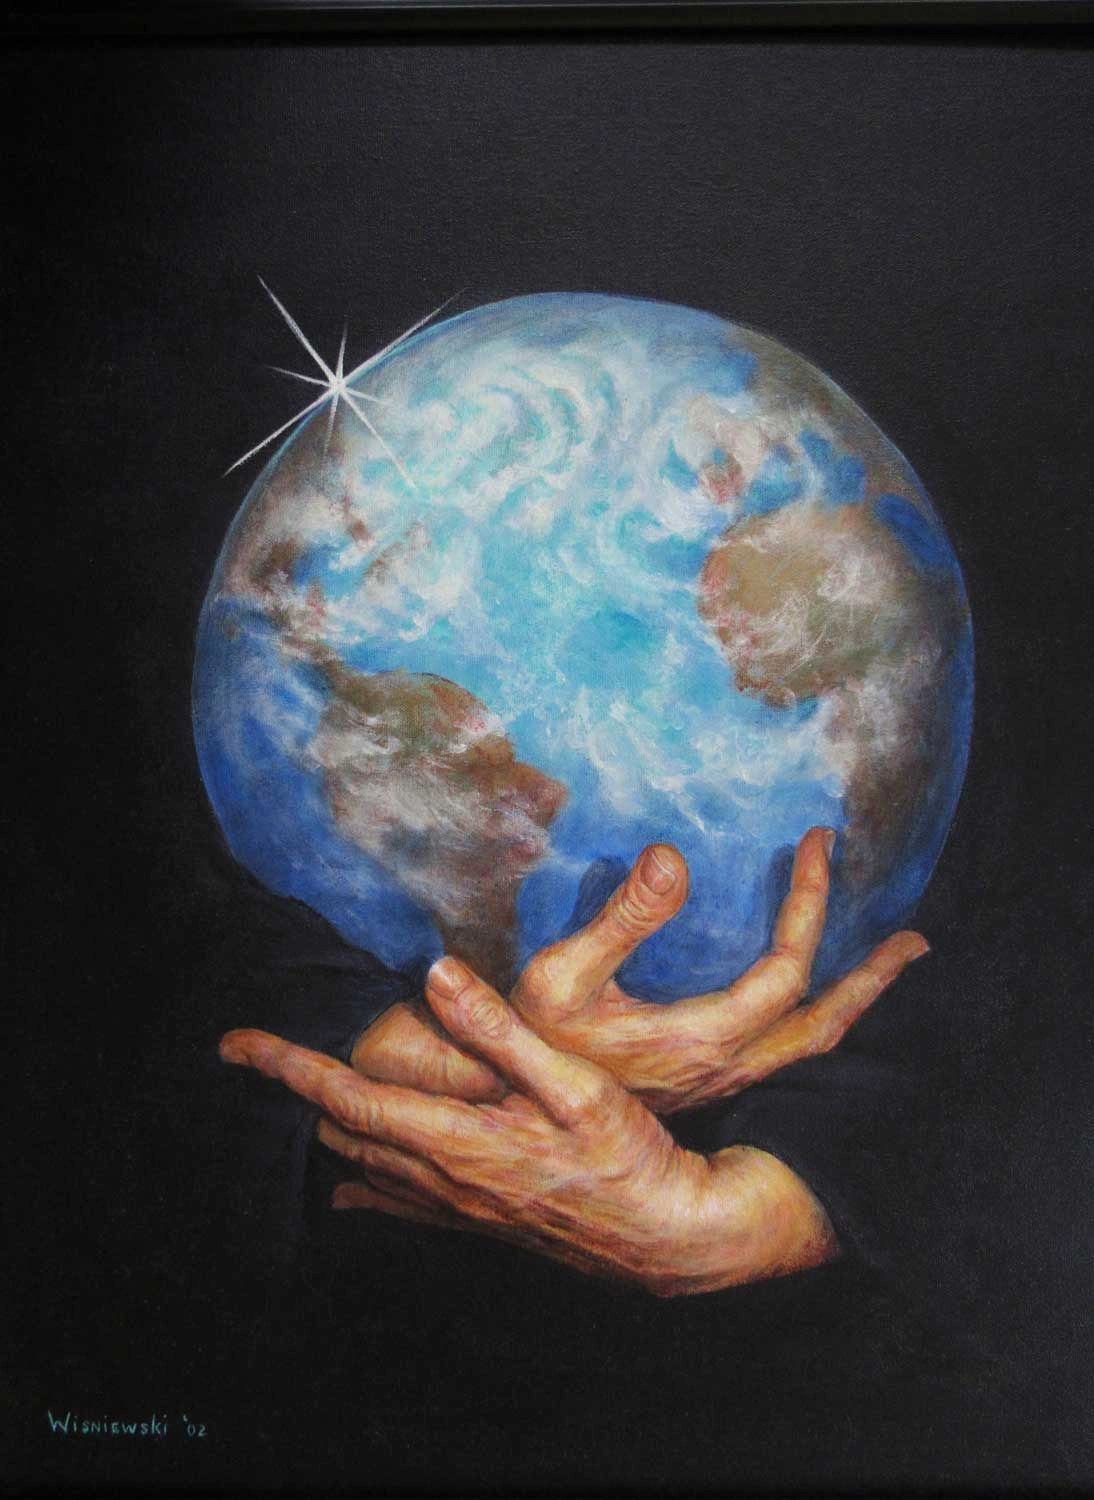 Hands protecting the earth in the universe.
Acrylic painting by Stan Wisniewski.